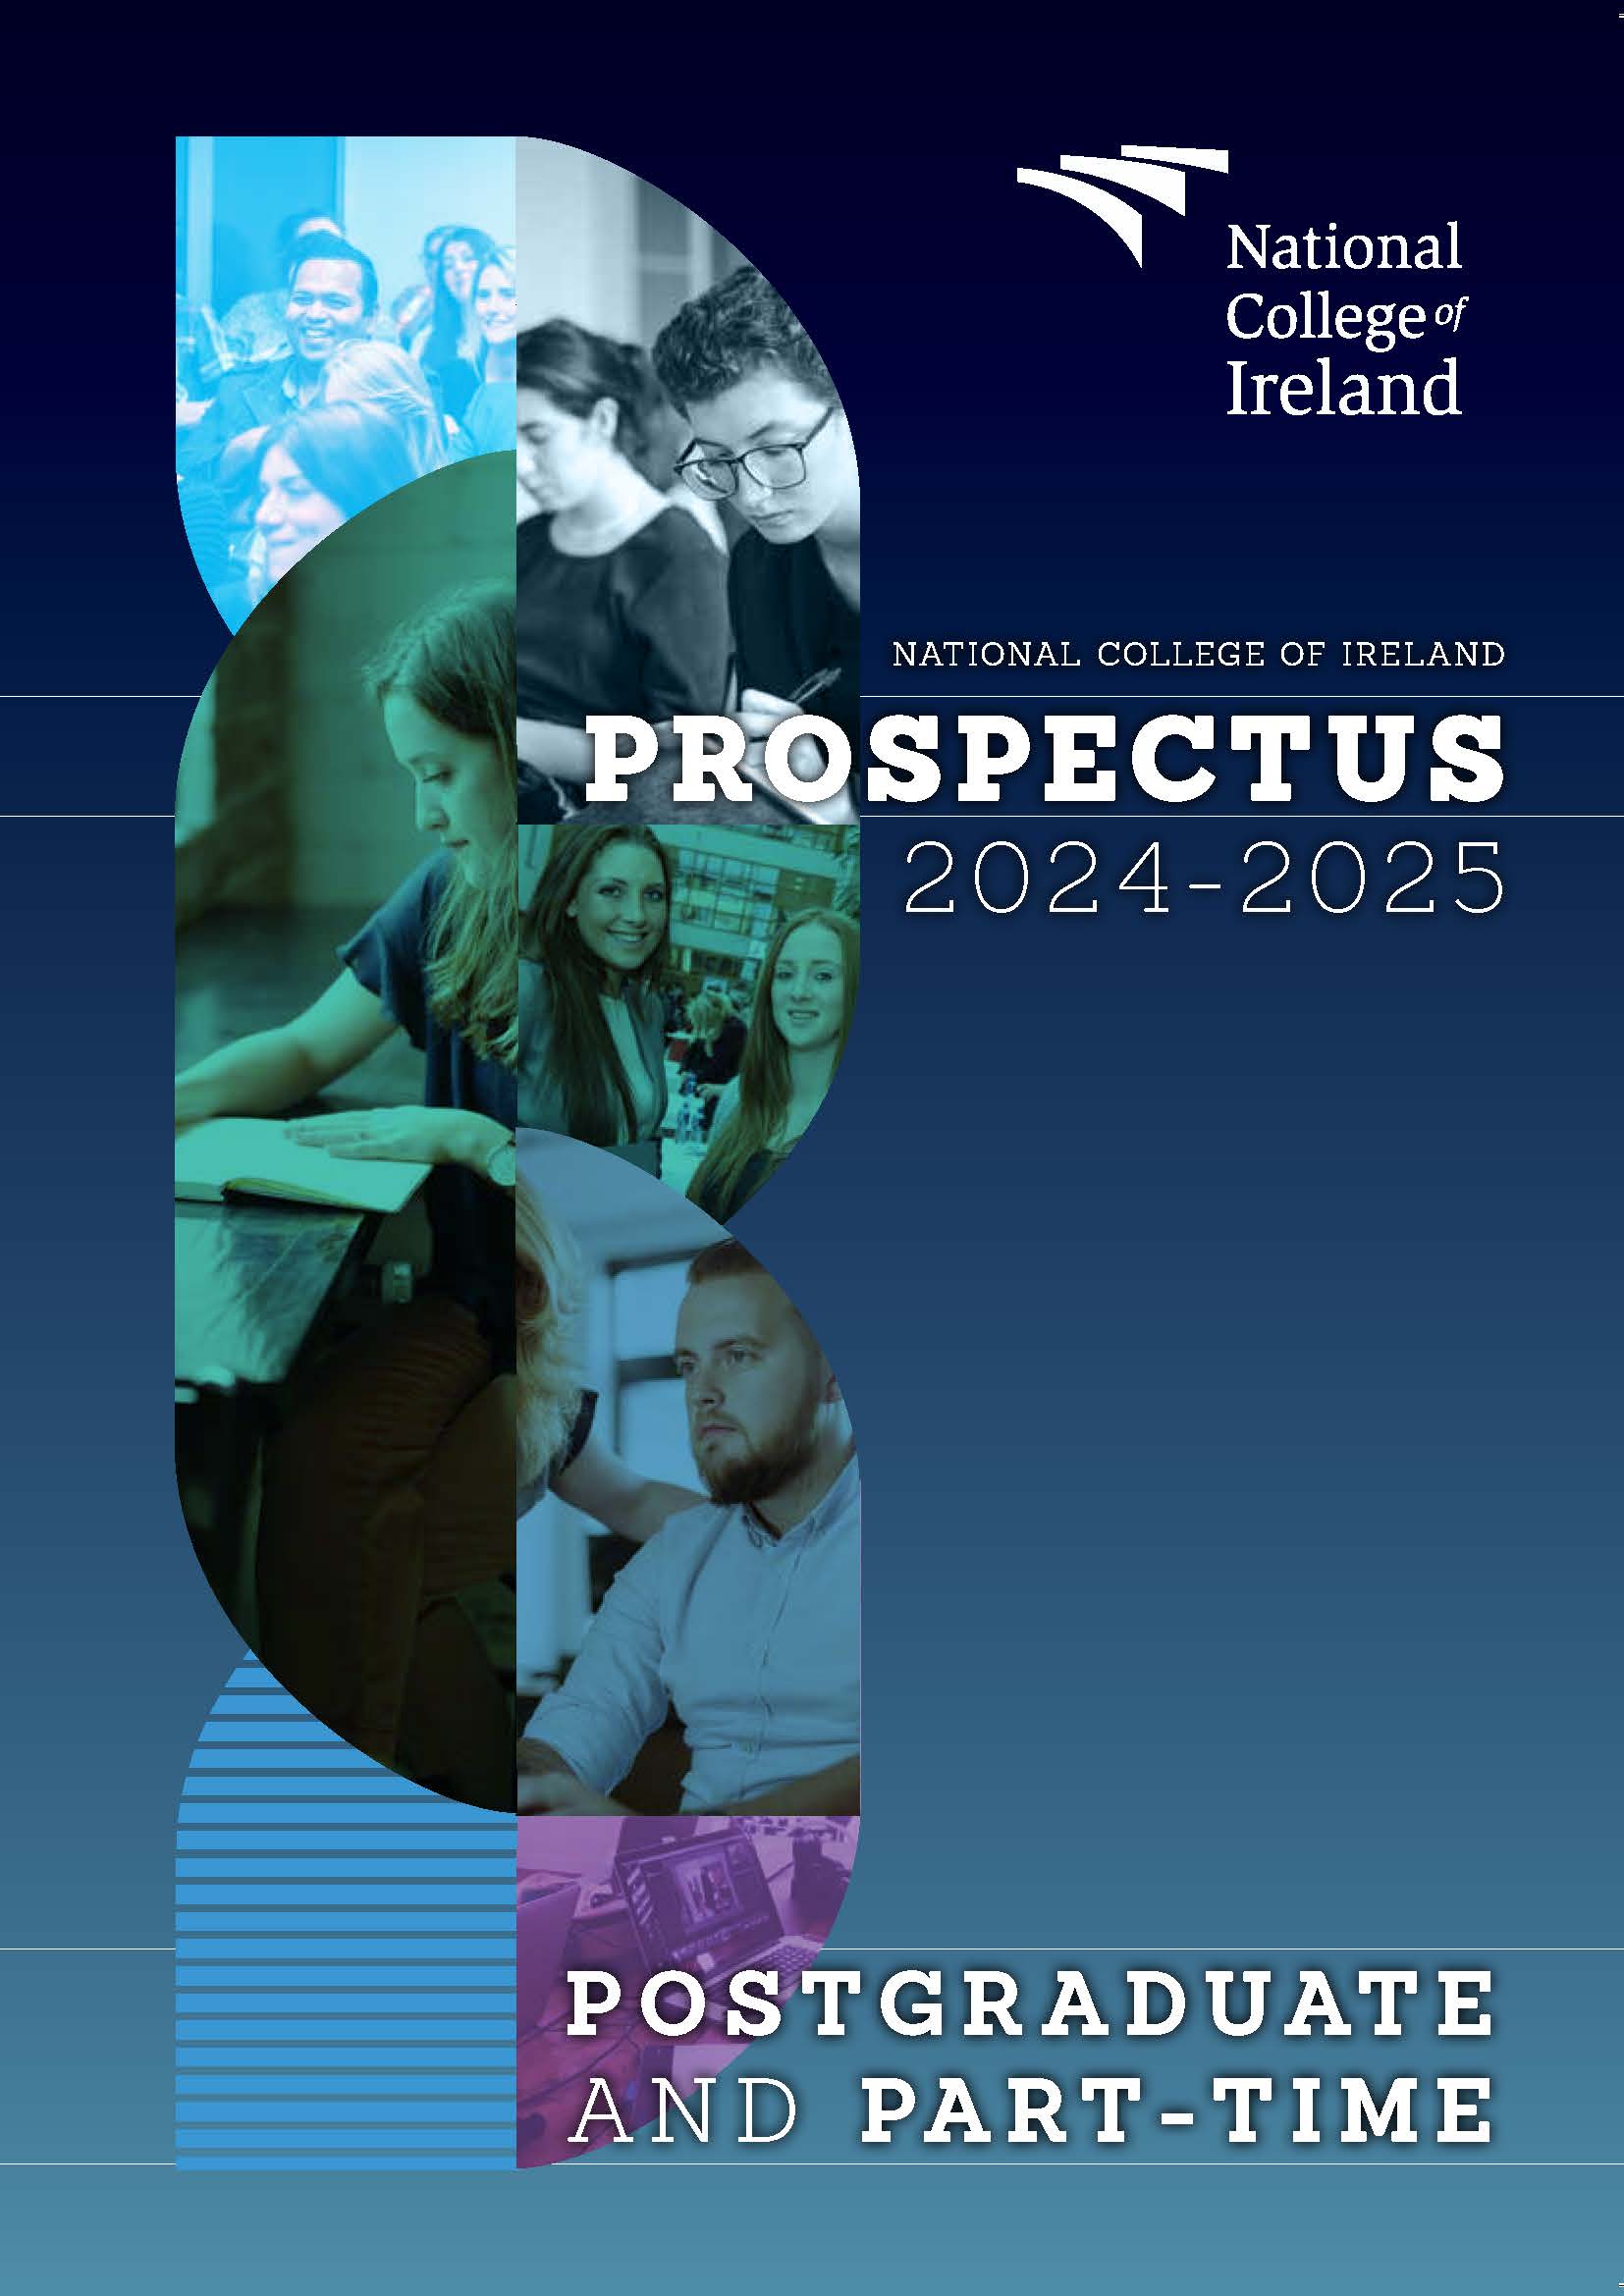 Pages from NCI Prospectus Postgraduate and Part-Time 2024 - 2025